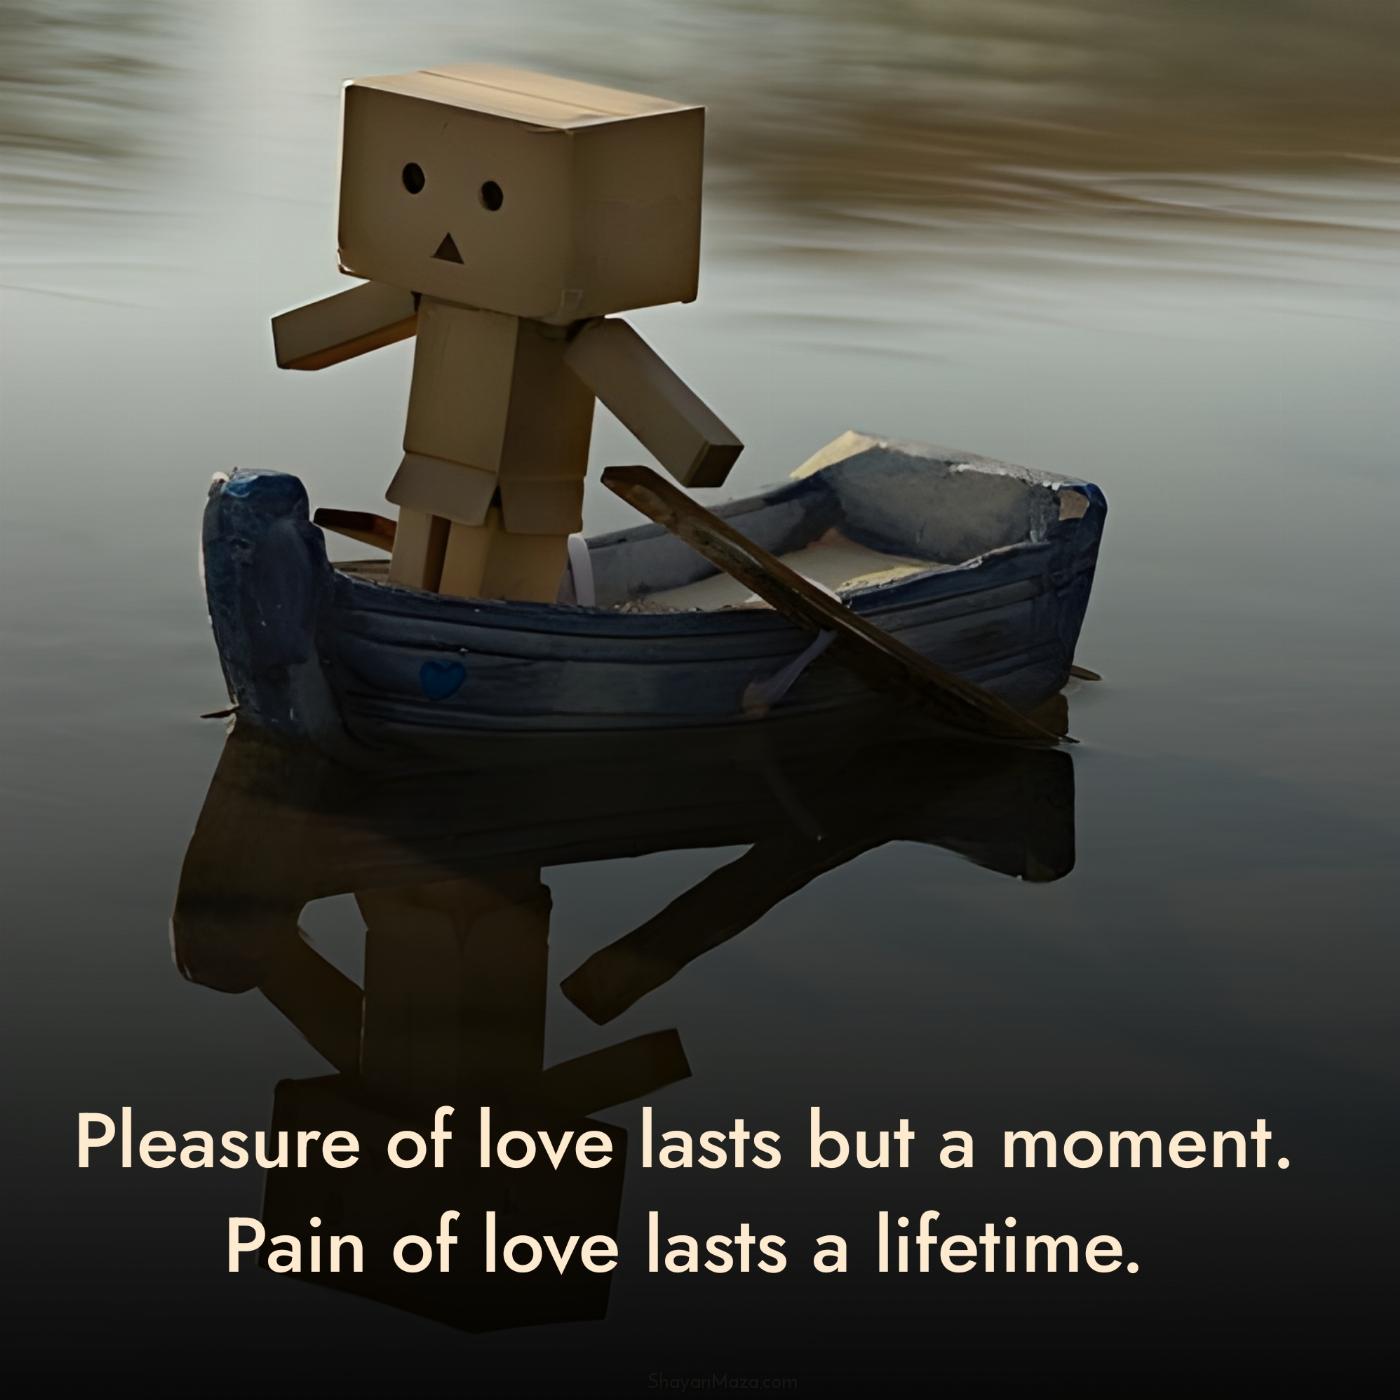 Pleasure of love lasts but a moment